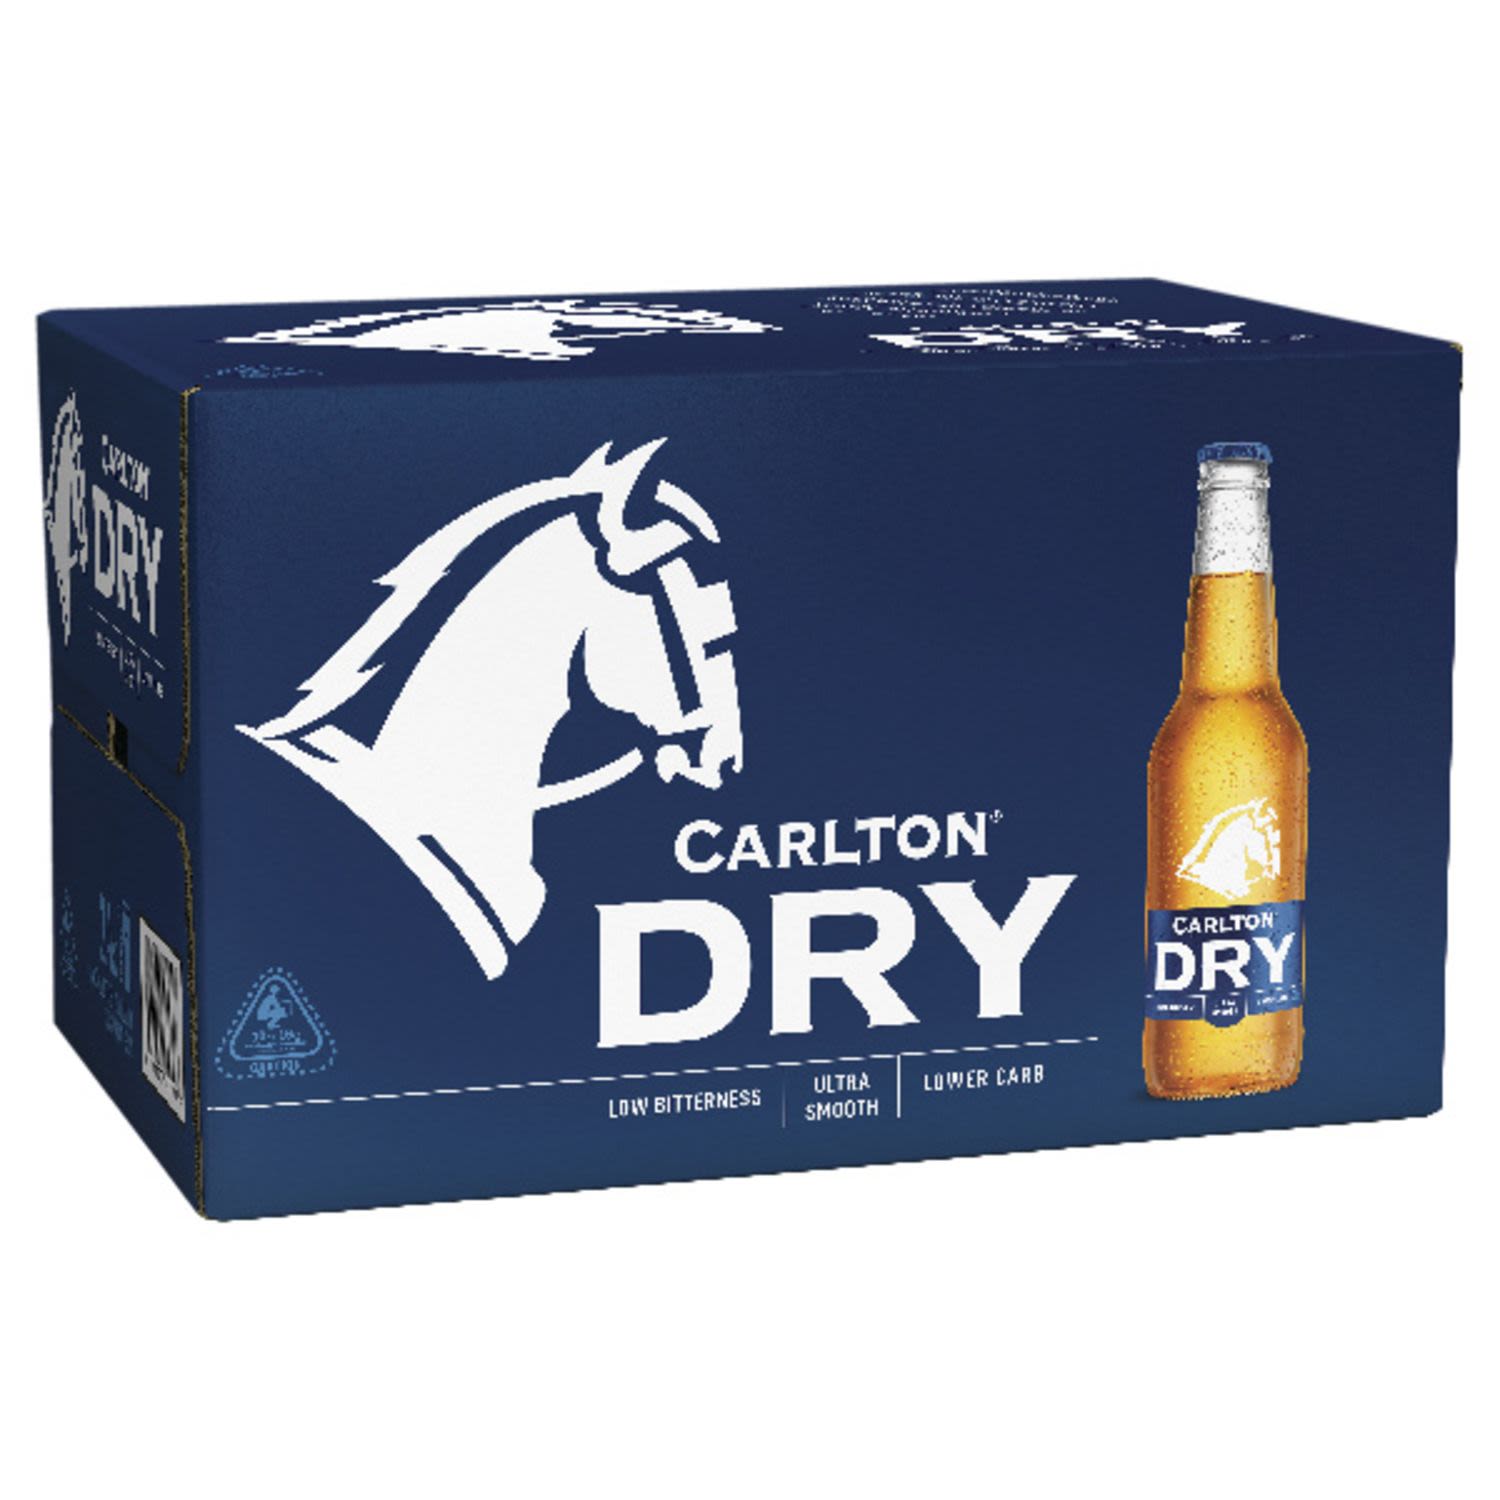 Carlton Dry's extended brewing process removes excess sugars creating a smooth, crisp finish with lower carbohydrates than a full strength beer. A clean, crisp and incredibly refreshing lager that is perfect drinking in the summer sunshine or equally at home.<br /> <br />Alcohol Volume: 4.50%<br /><br />Pack Format: 24 Pack<br /><br />Standard Drinks: 1.2<br /><br />Pack Type: Bottle<br /><br />Country of Origin: Australia<br />